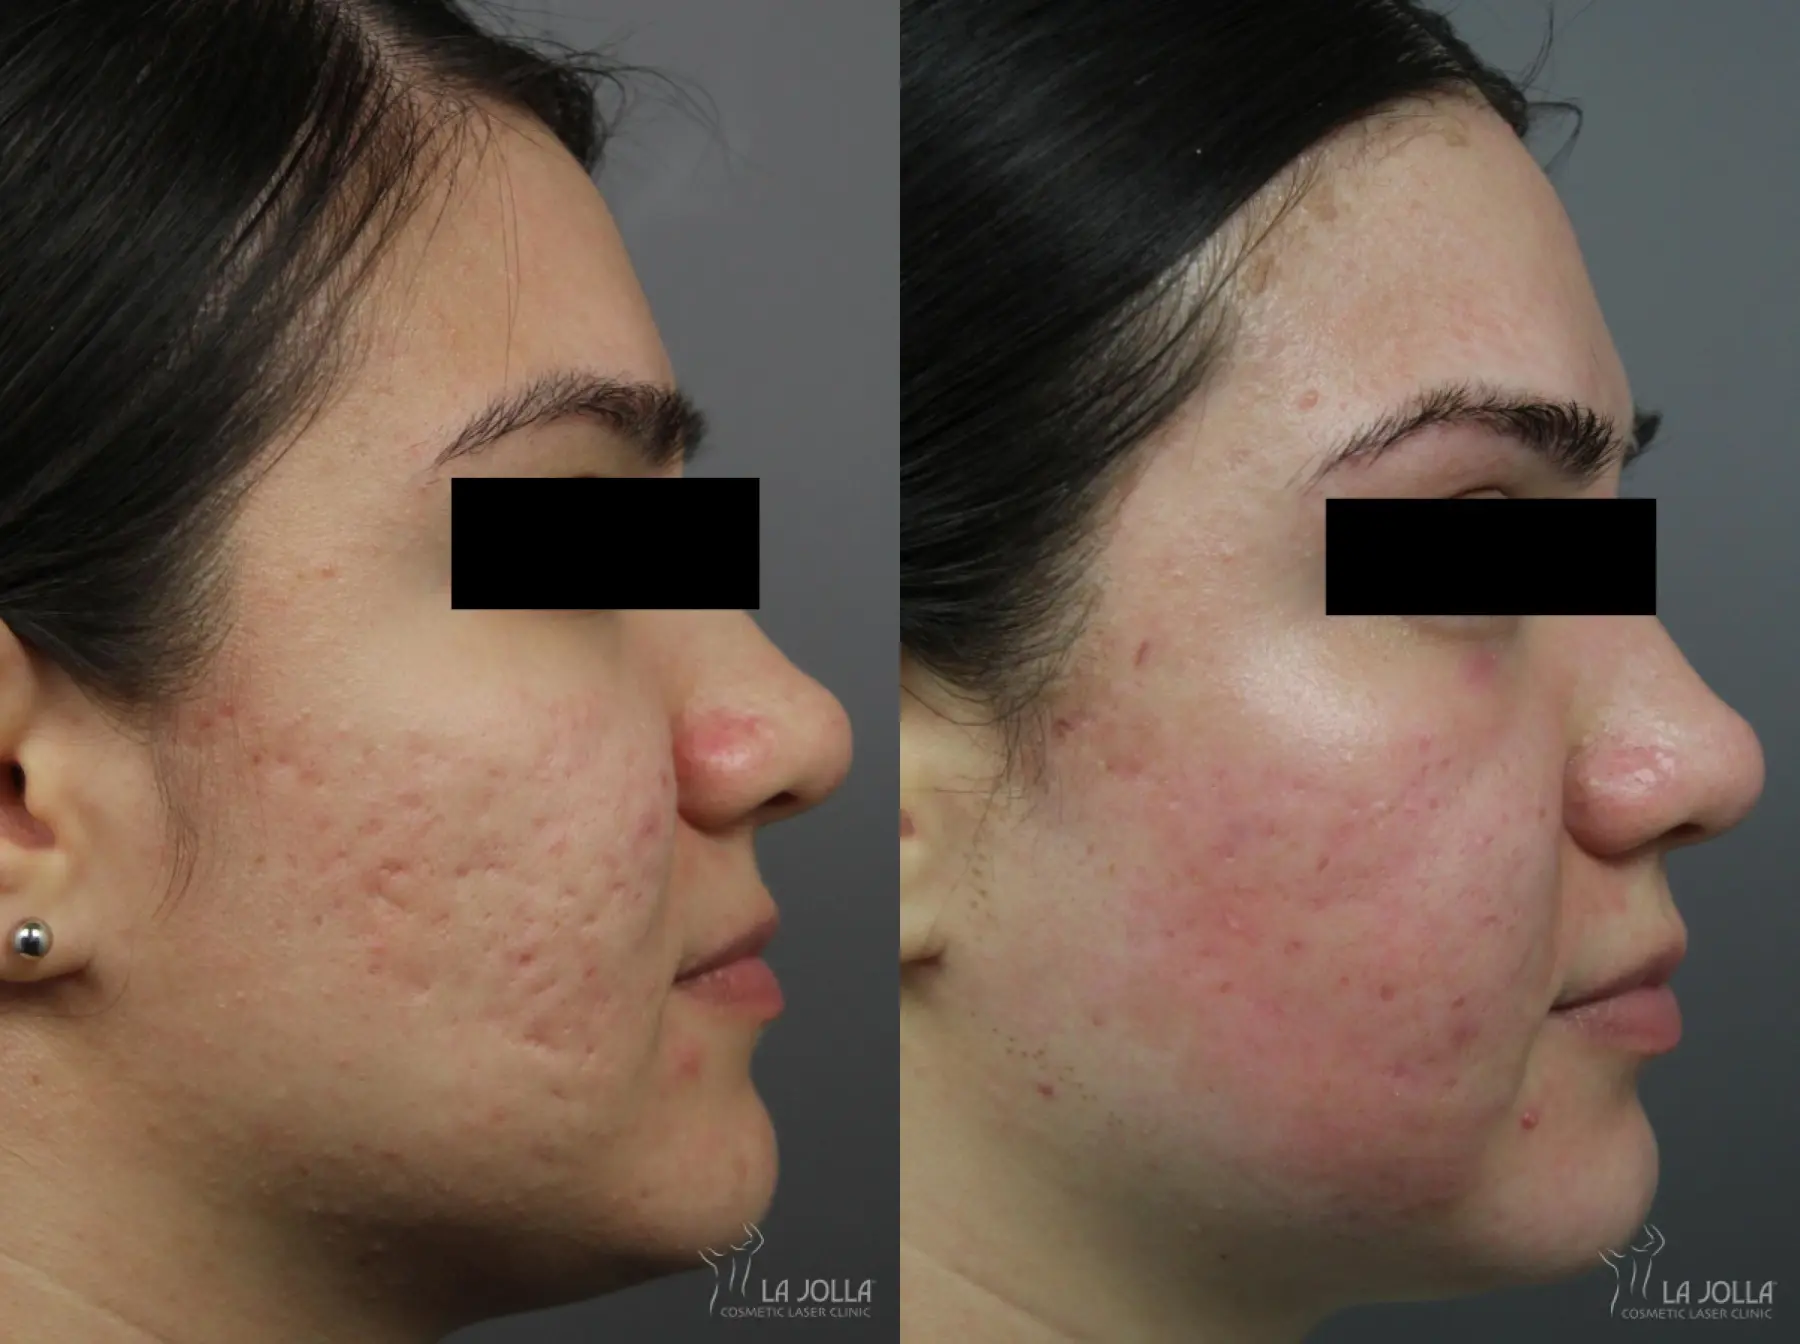 Acne Scars: Patient 1 - Before and After 1